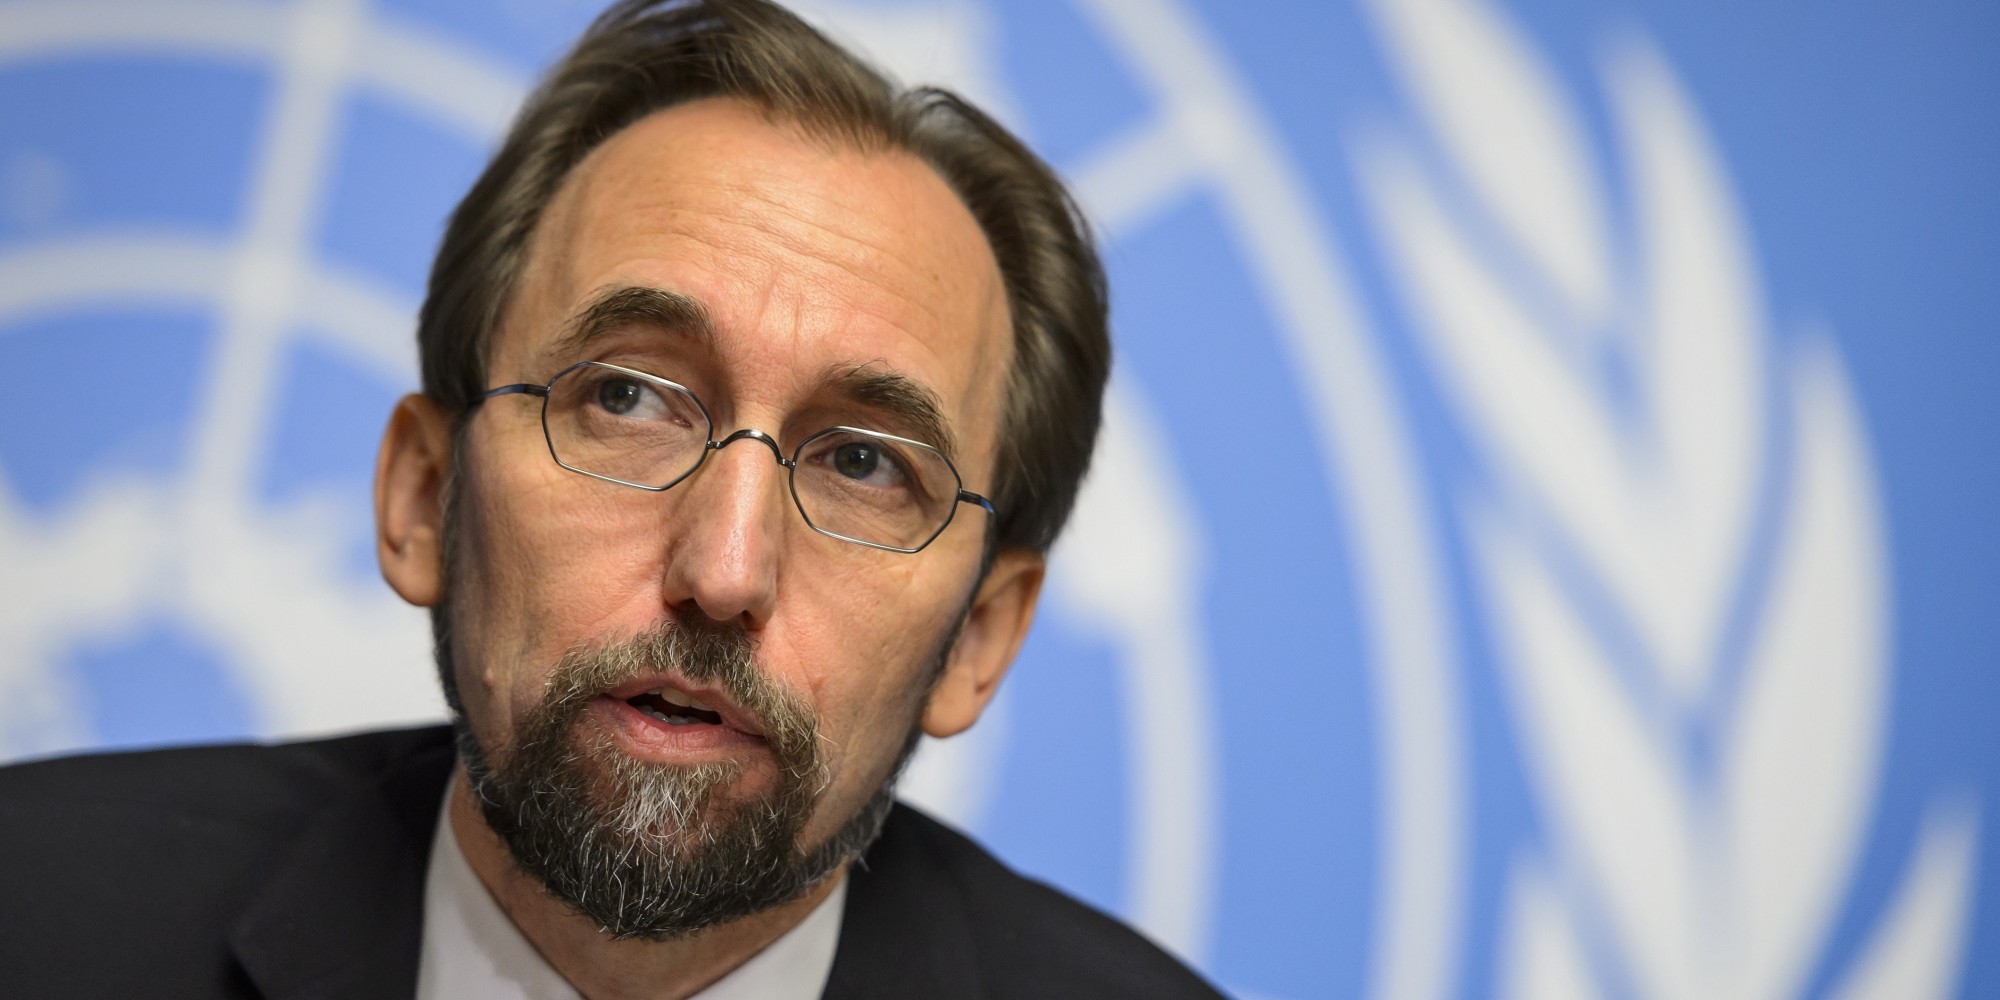 New High Commissioner of the United Nations (UN) for Human Rights, Zeid Ra'ad al-Hussein of Jordan, attends a press conference on October 16, 2014 in Geneva. AFP PHOTO / FABRICE COFFRINI        (Photo credit should read FABRICE COFFRINI/AFP/Getty Images)